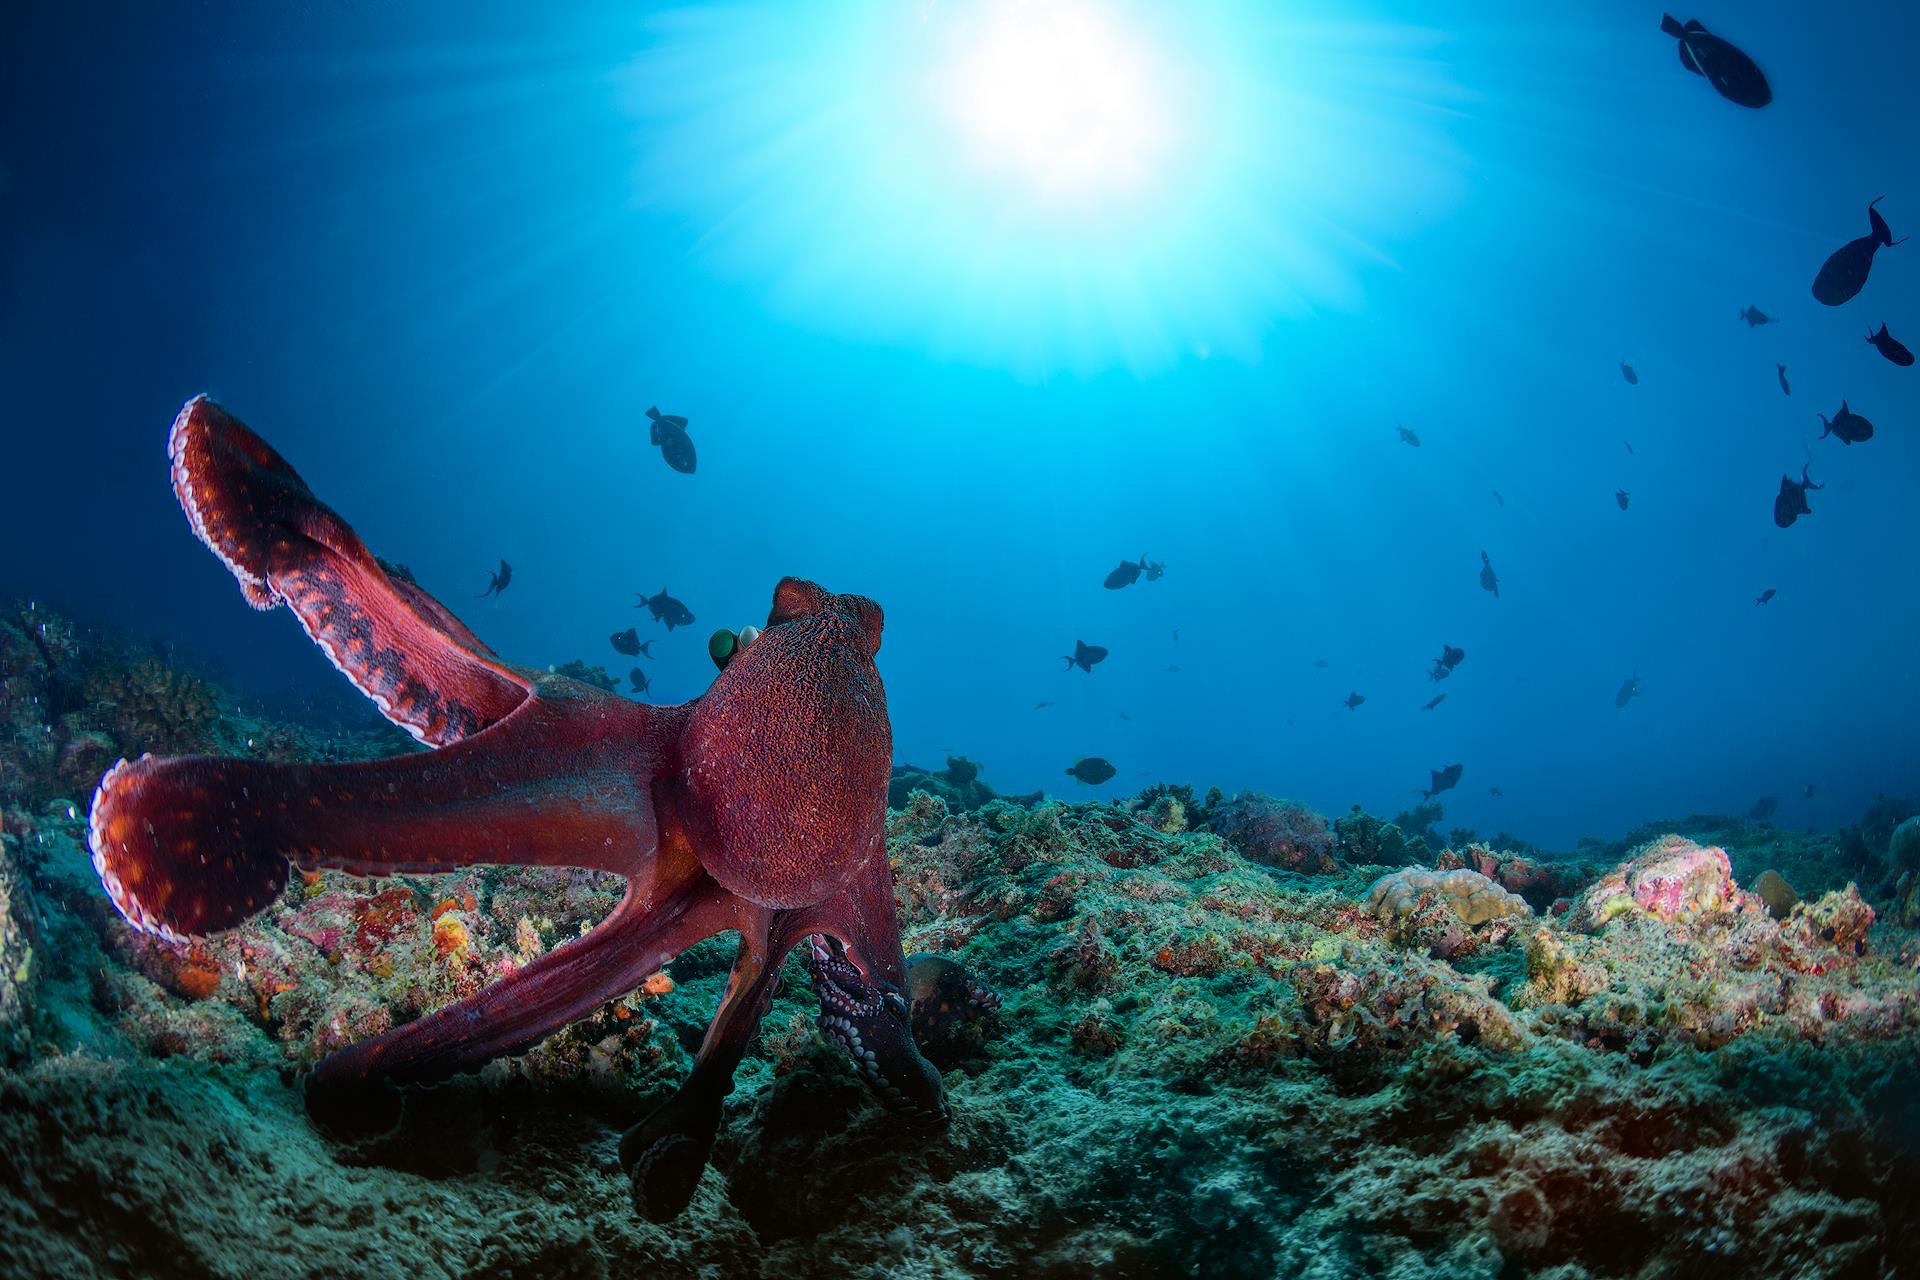 Octopus on a reef